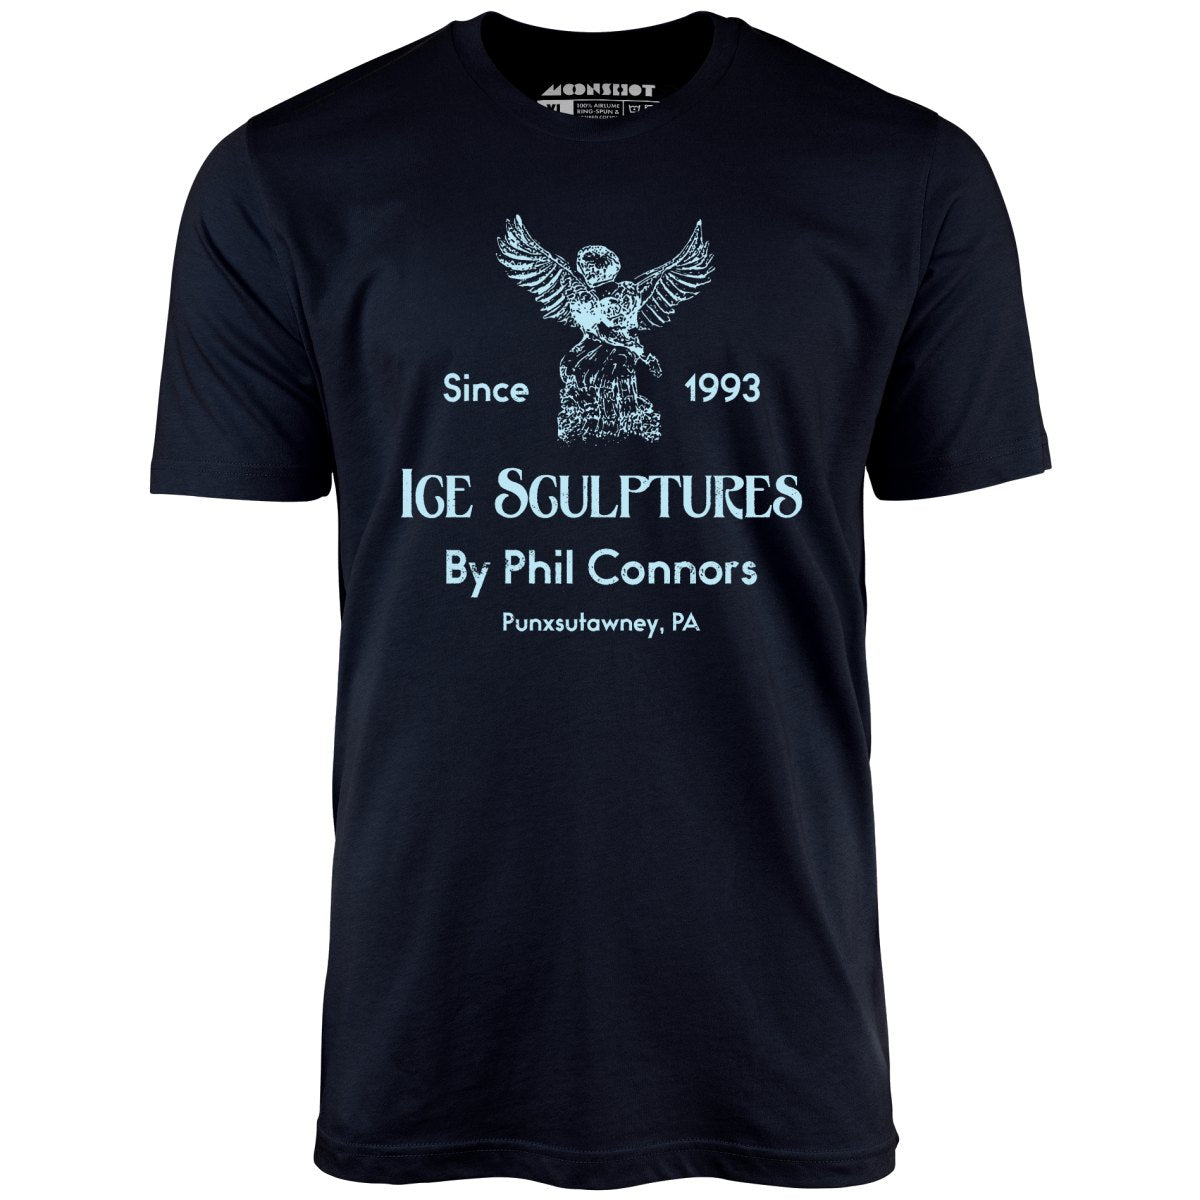 Ice Sculptures by Phil Connors - Groundhog Day - Unisex T-Shirt